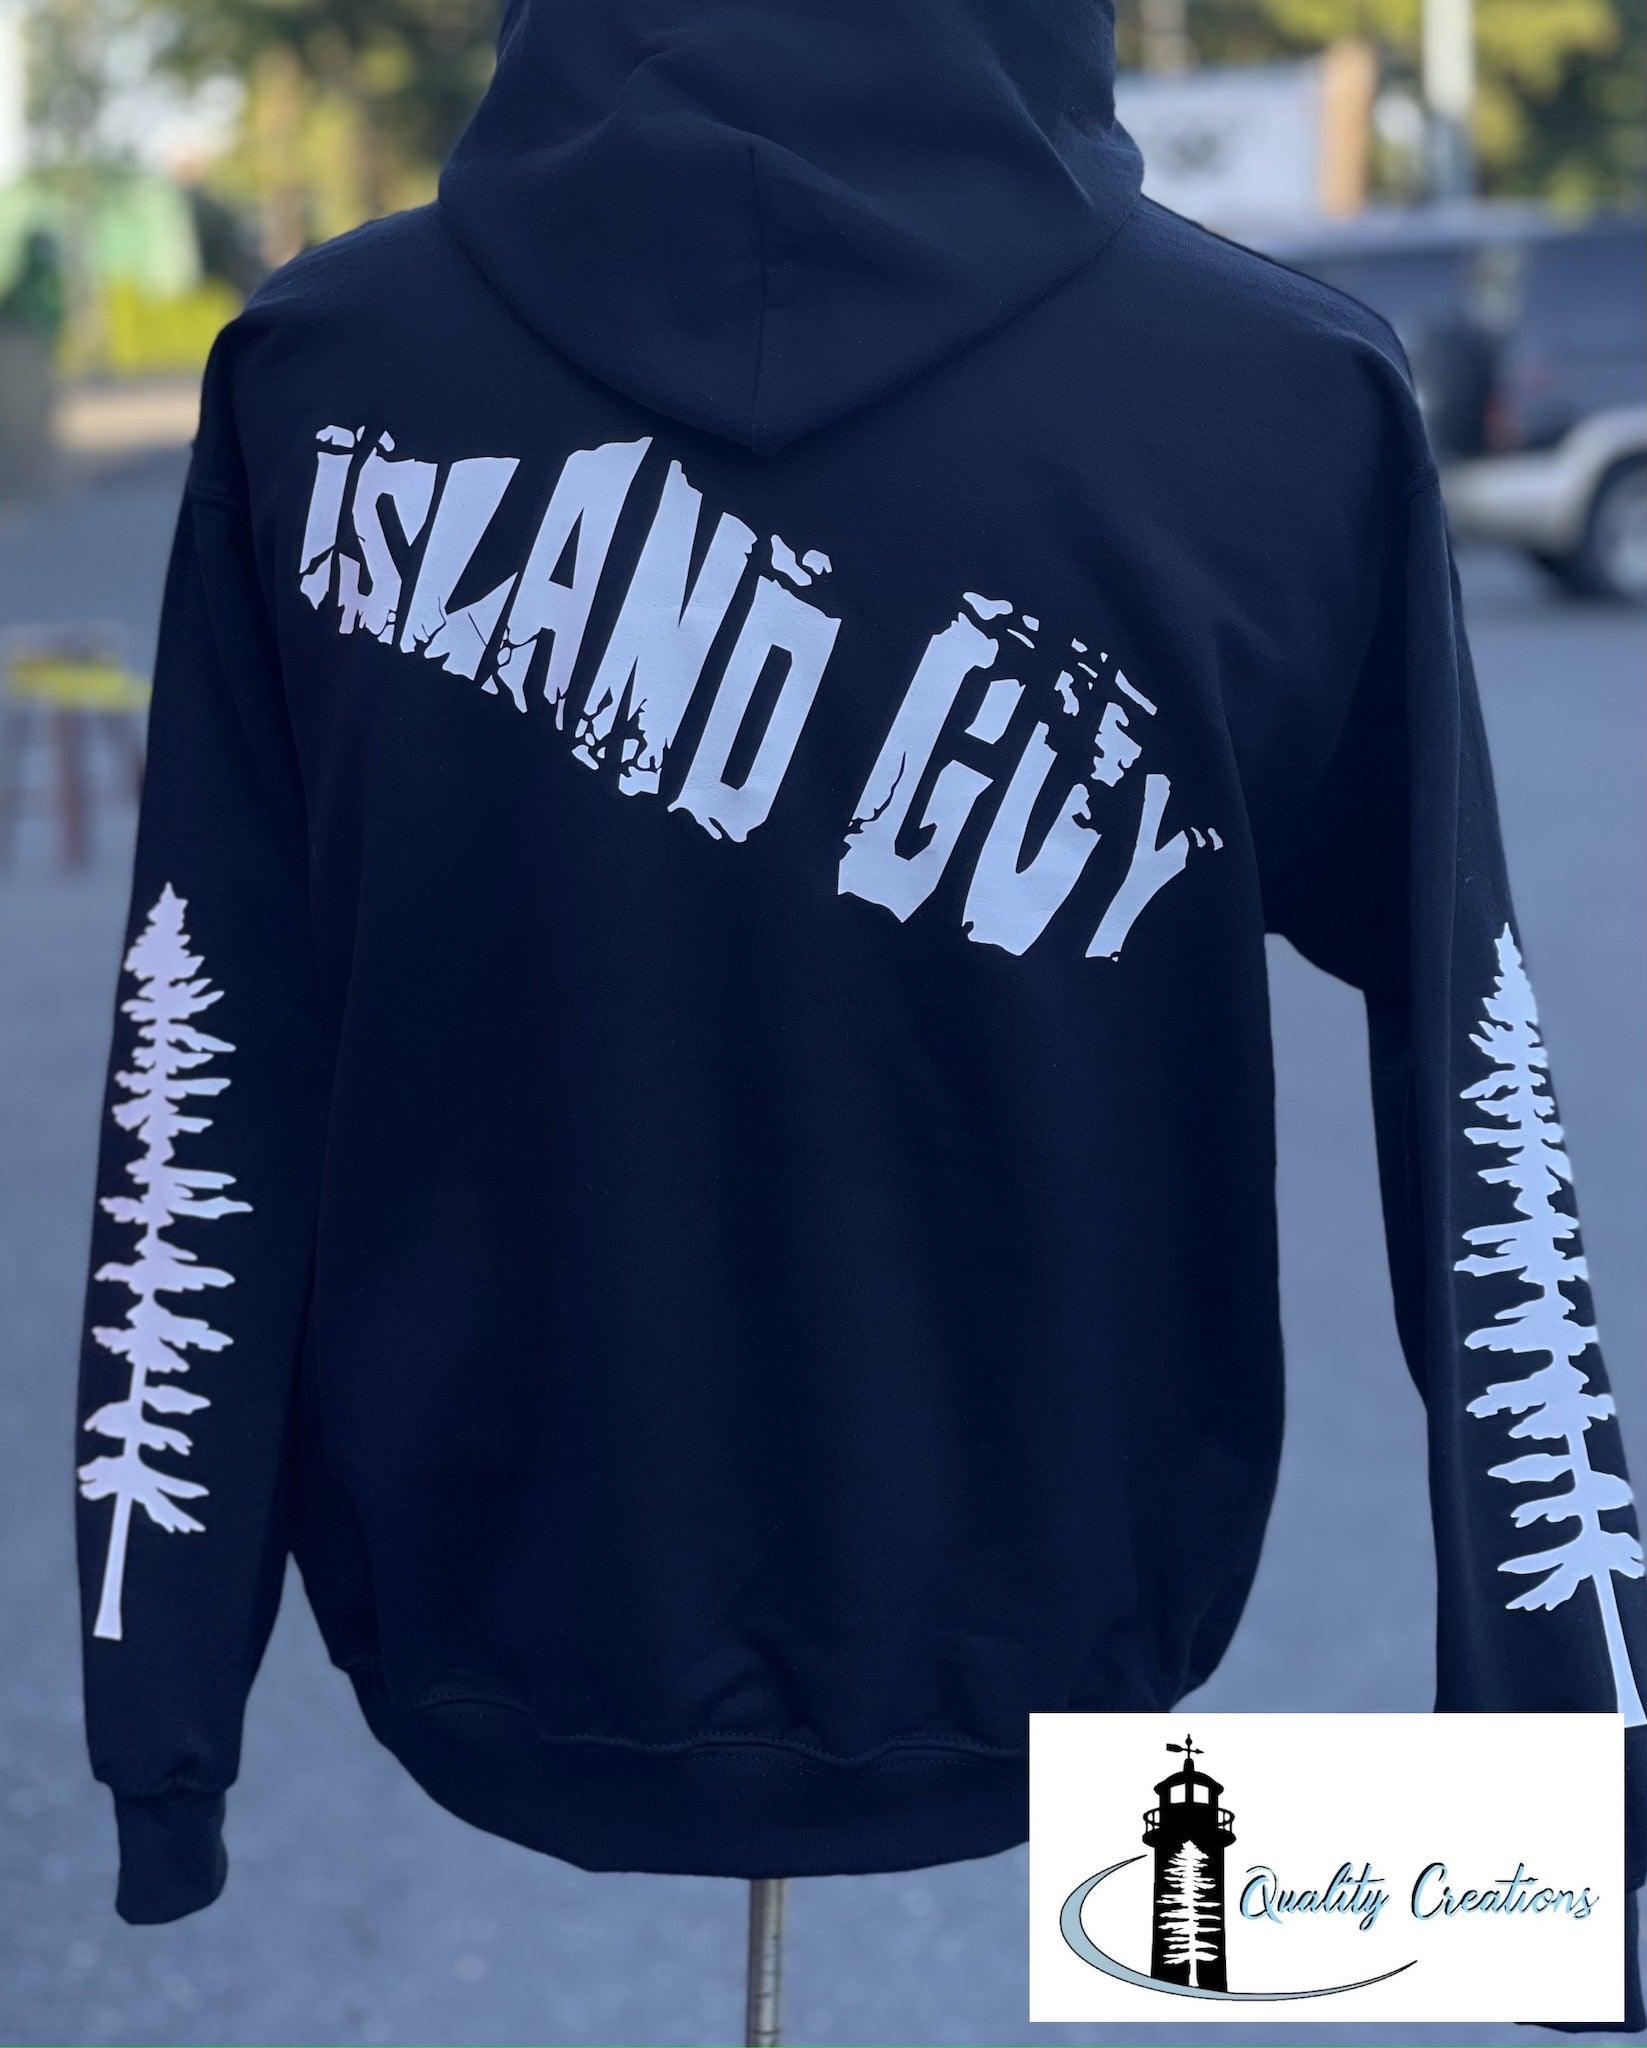 Vancouver Island guy white font quality creations New Brunswick canada